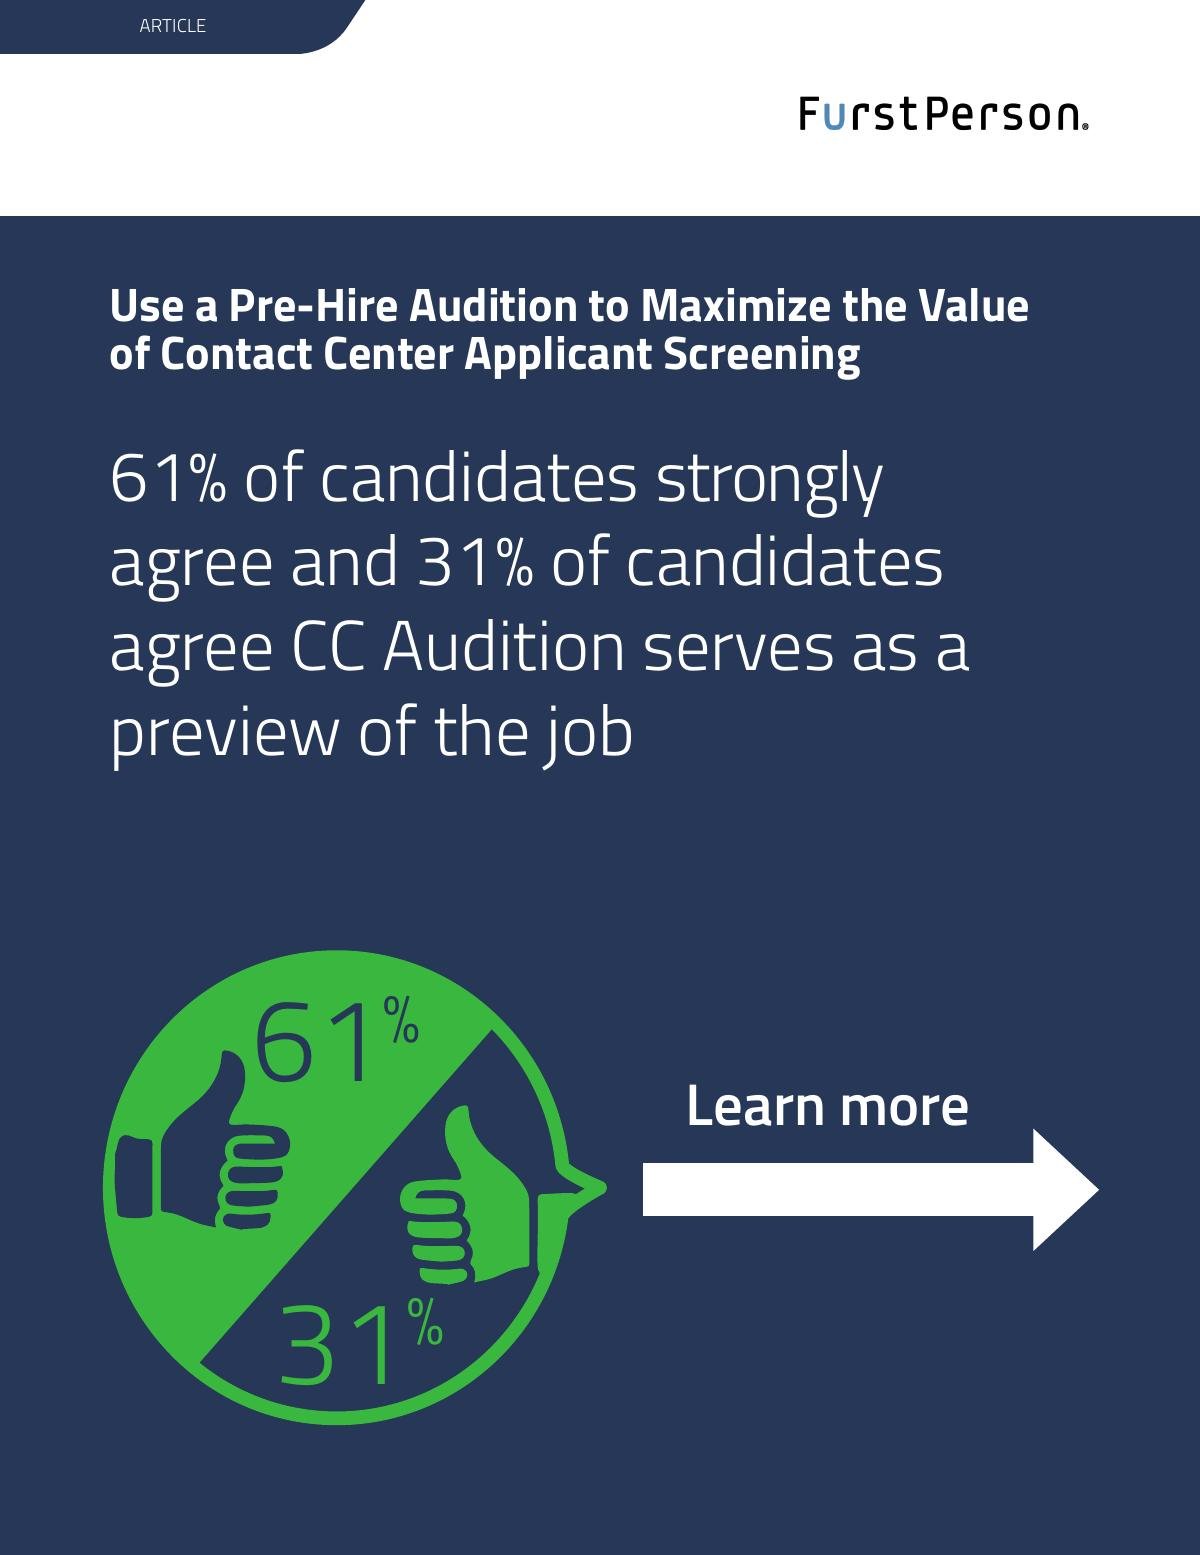 Use a Pre-Hire Audition to Maximize the Value of Contact Center Applicant Screening